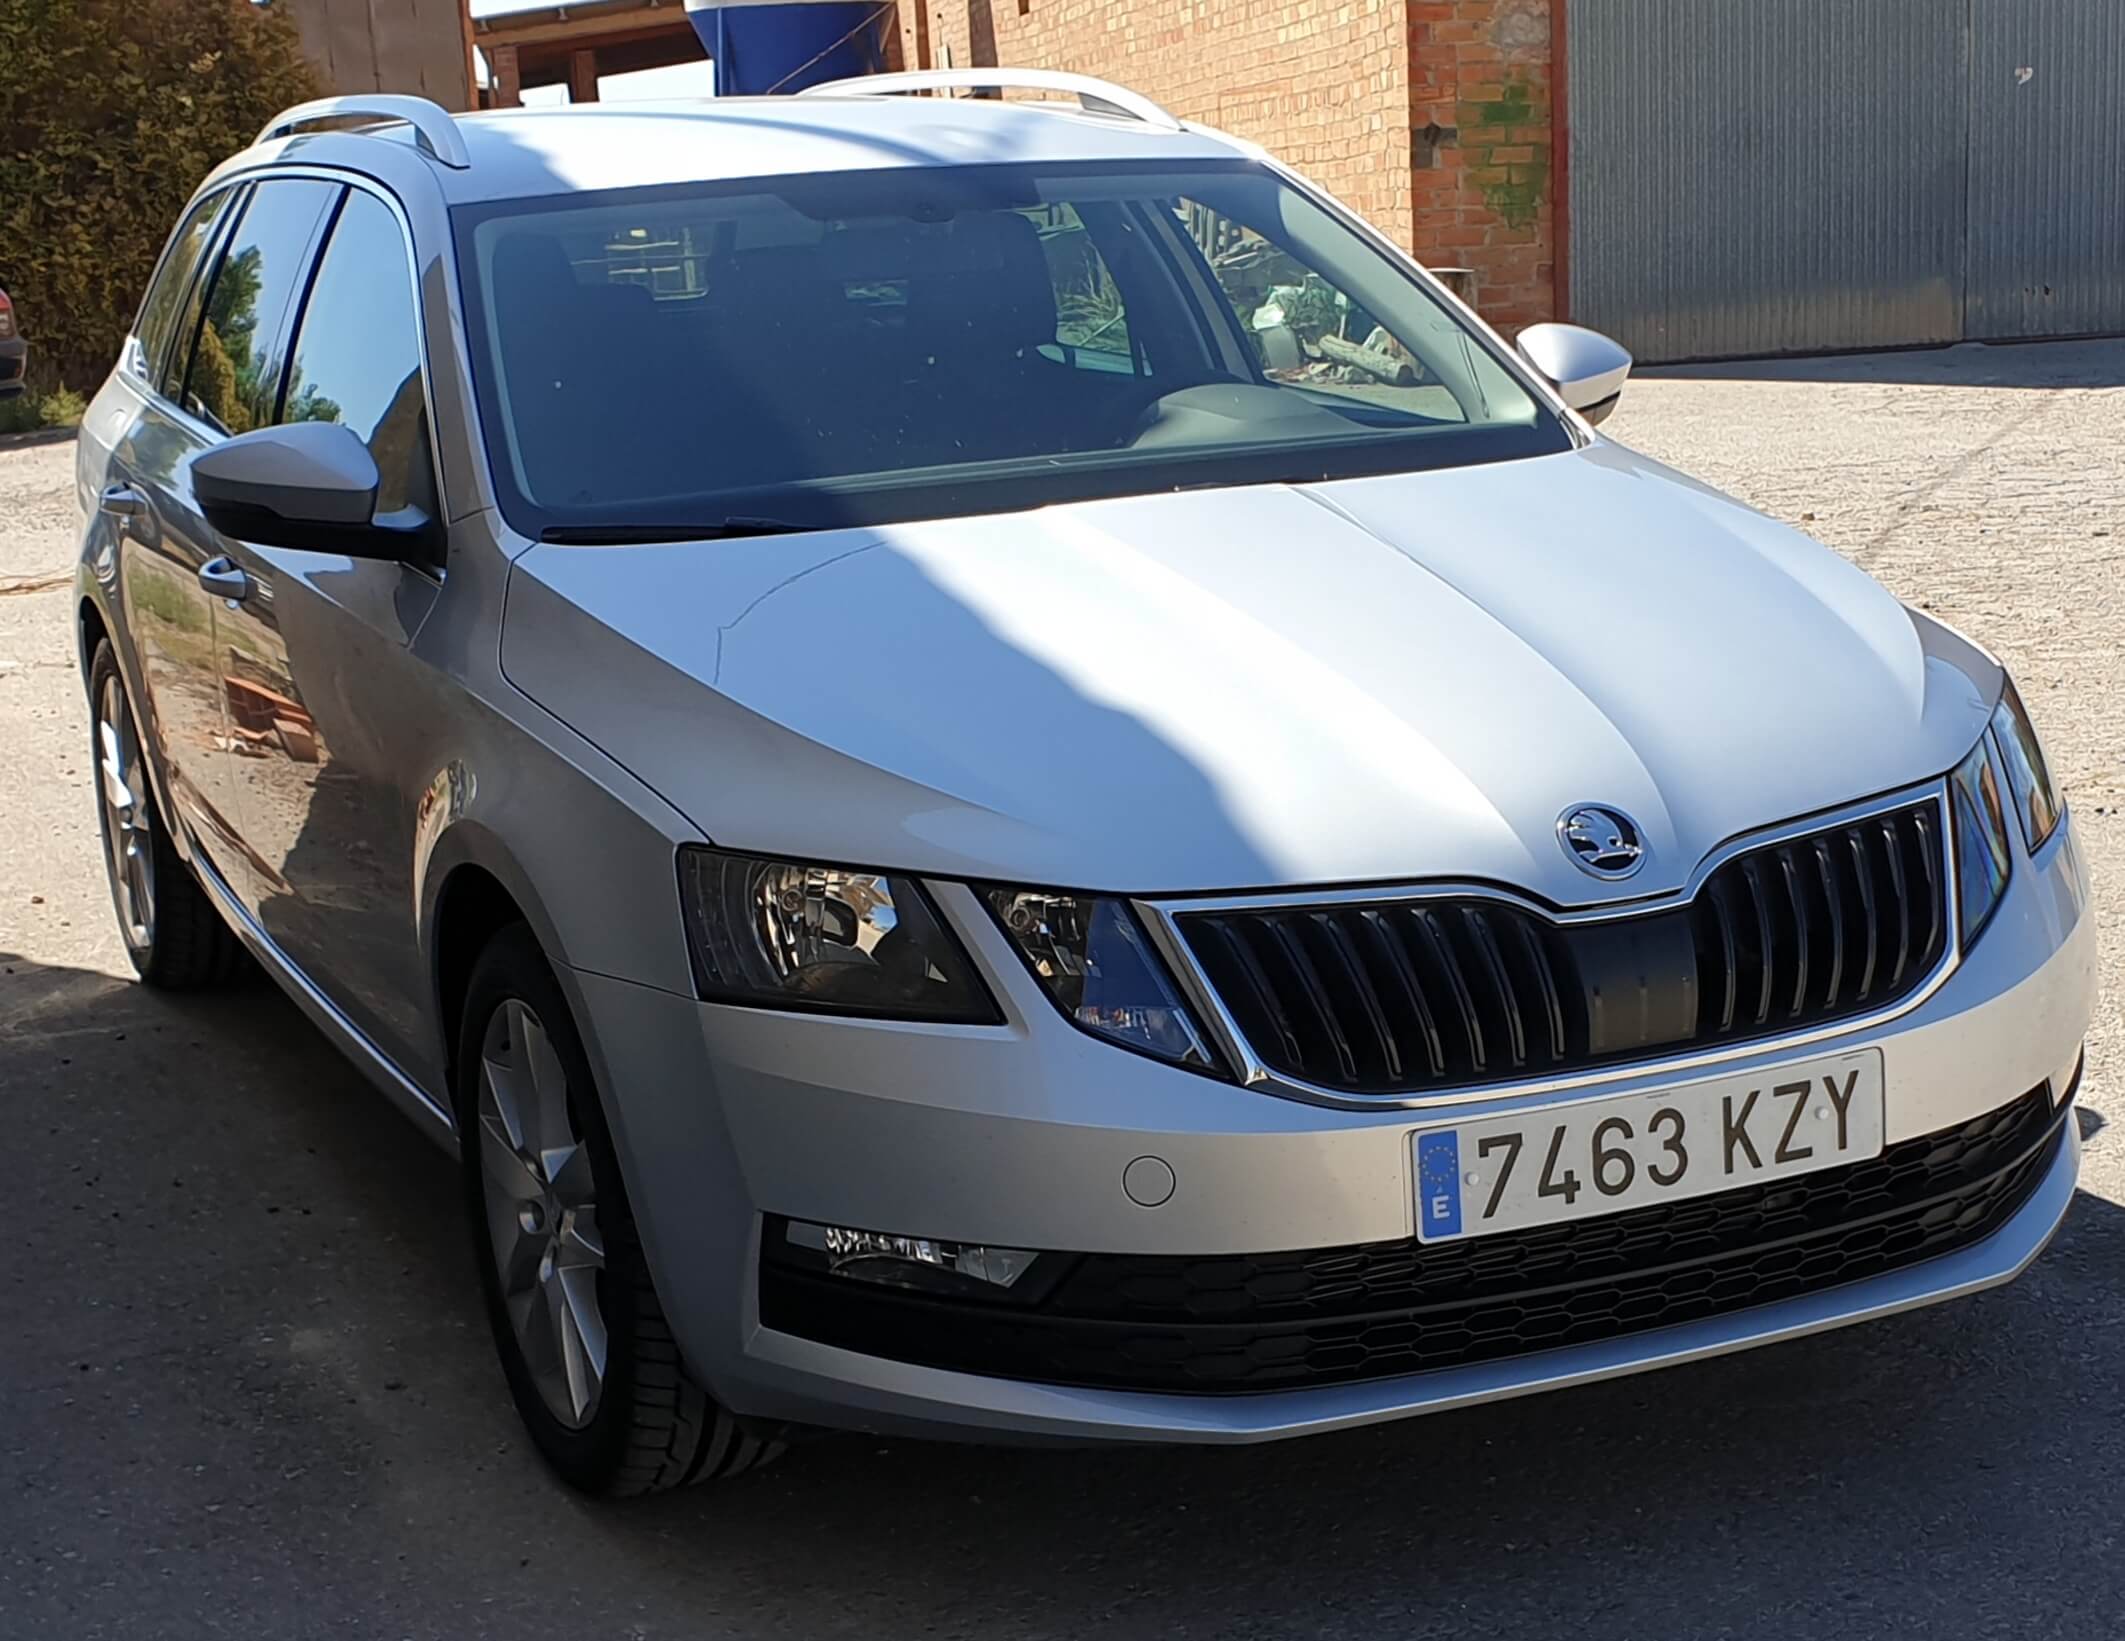 Rent a 5 seater Car with driver (Skoda Octavia 2019) from TAXIS YUS NIN from El Llor 